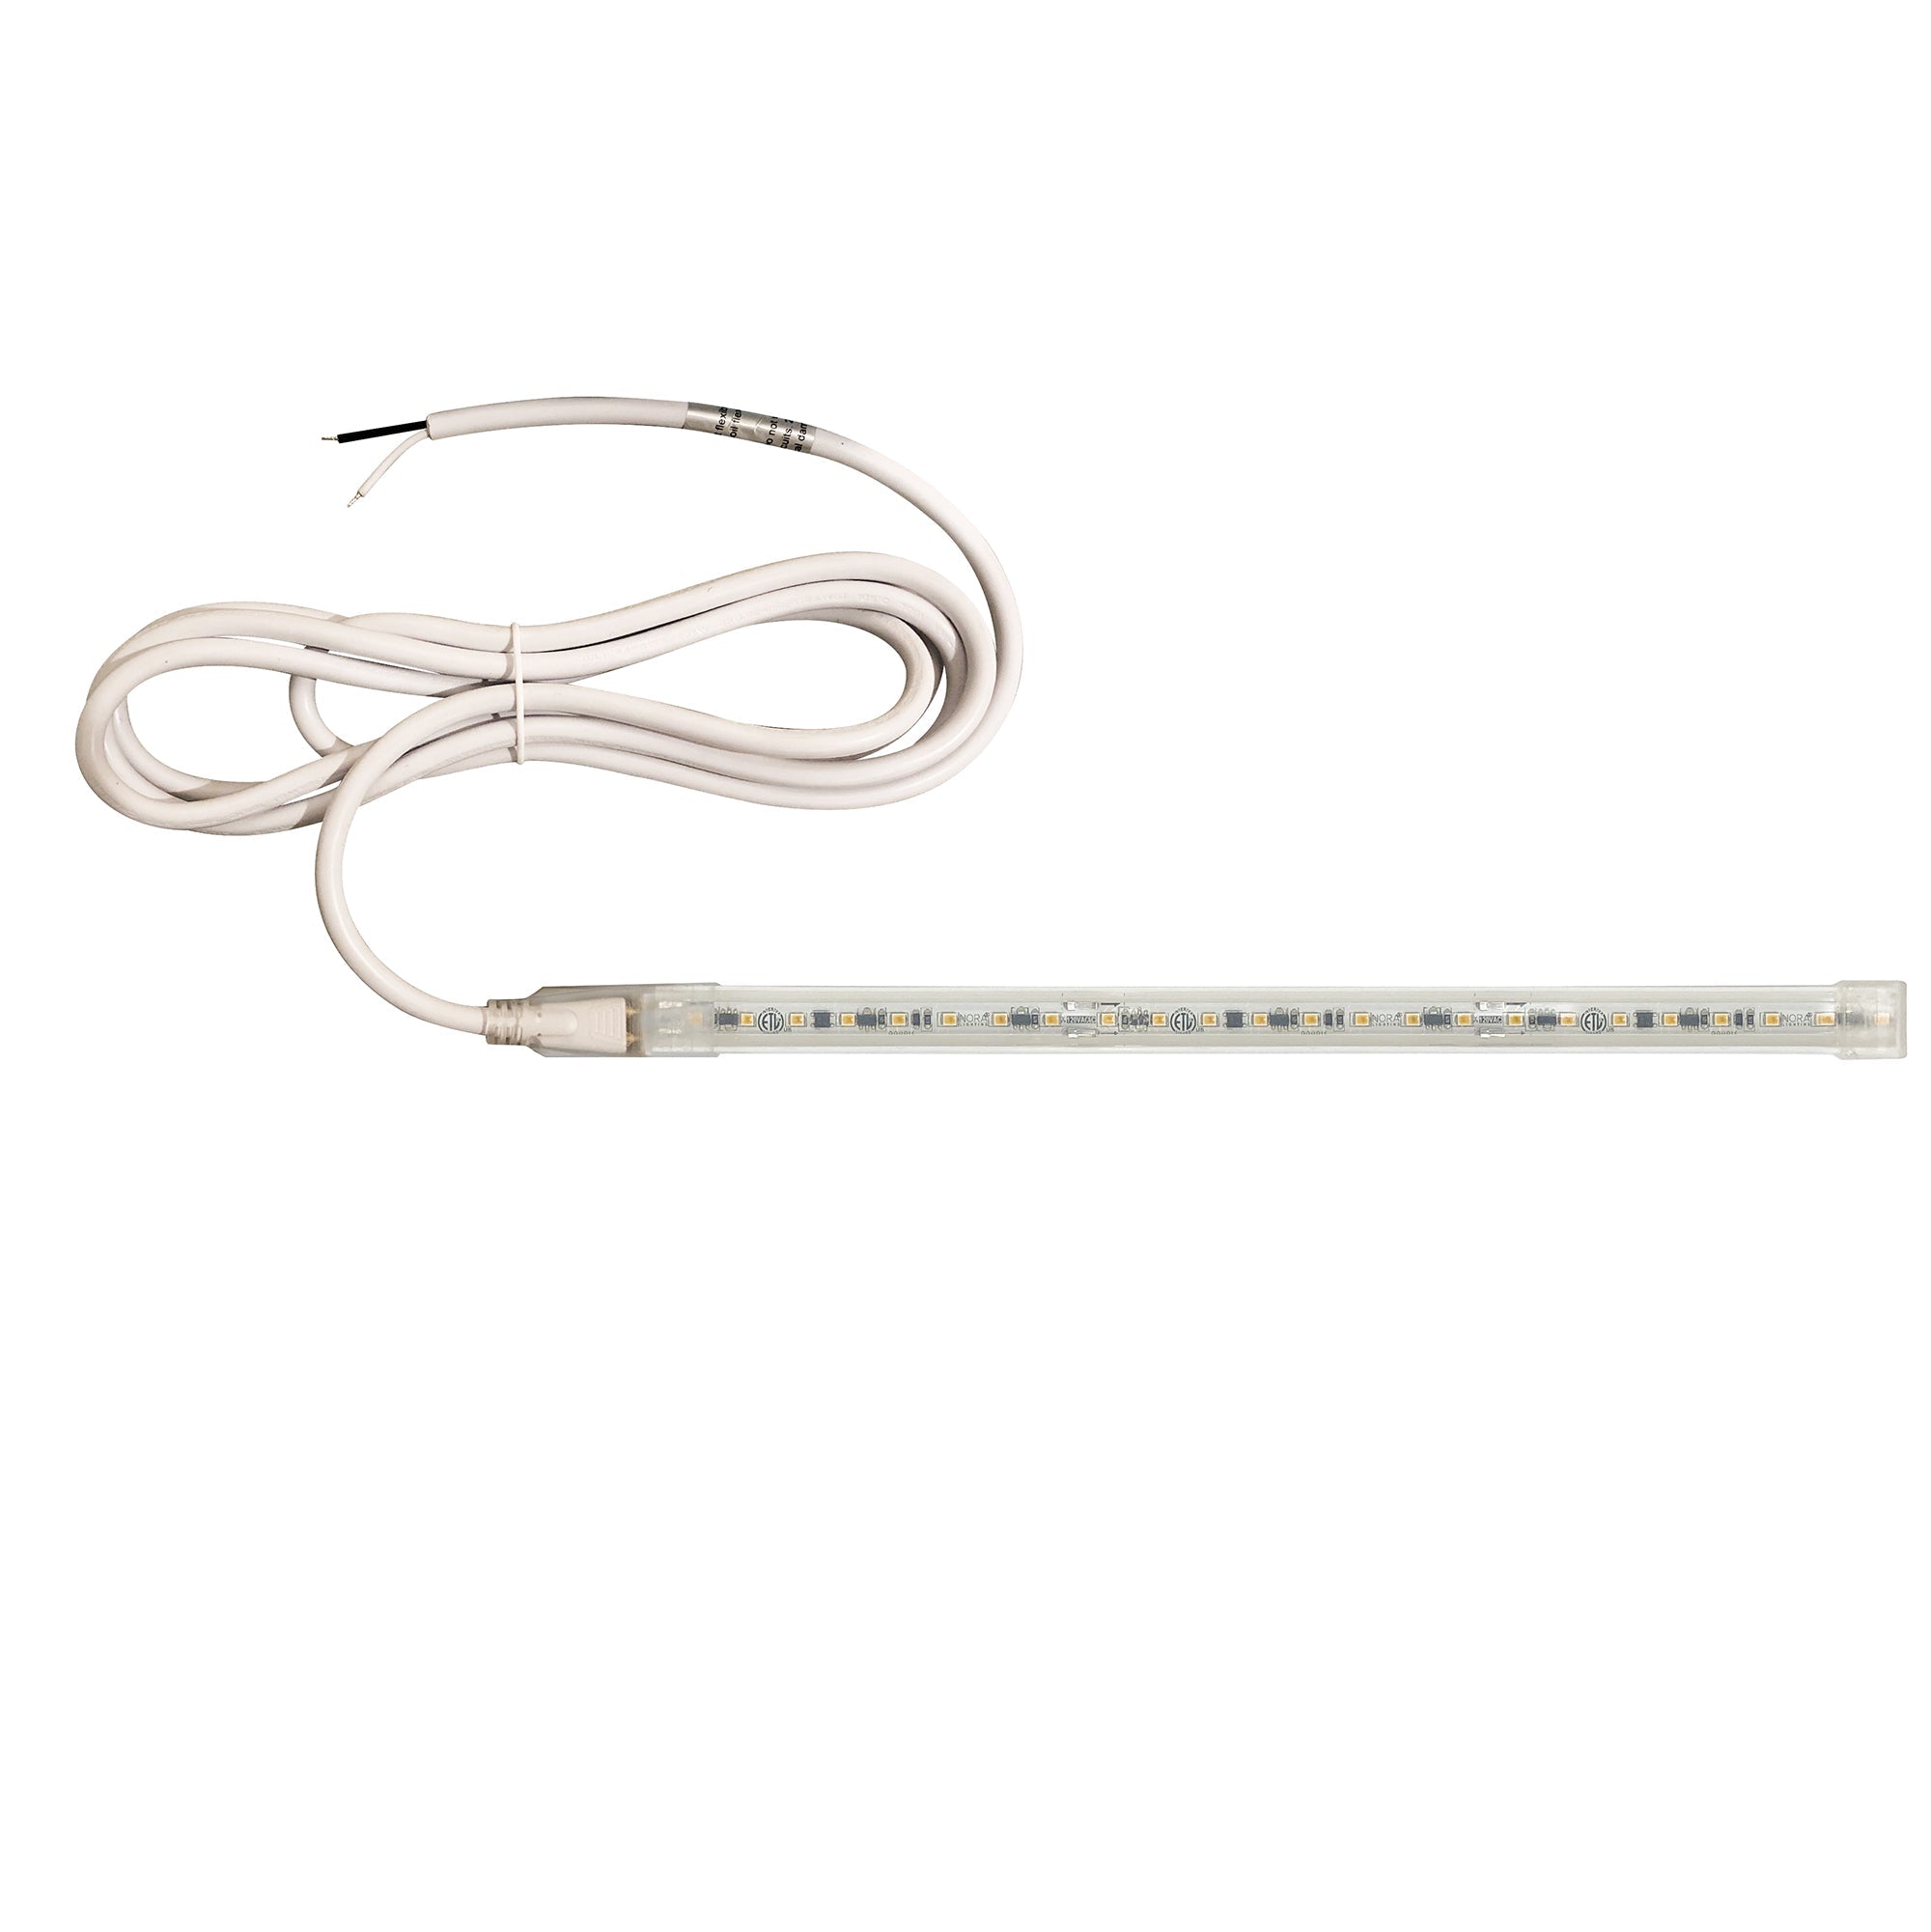 Nora Lighting NUTP13-W7-4-12-930/HW - Accent / Undercabinet - Custom Cut 7-ft, 4-in 120V Continuous LED Tape Light, 330lm / 3.6W per foot, 3000K, w/ Mounting Clips and 8' Hardwired Power Cord